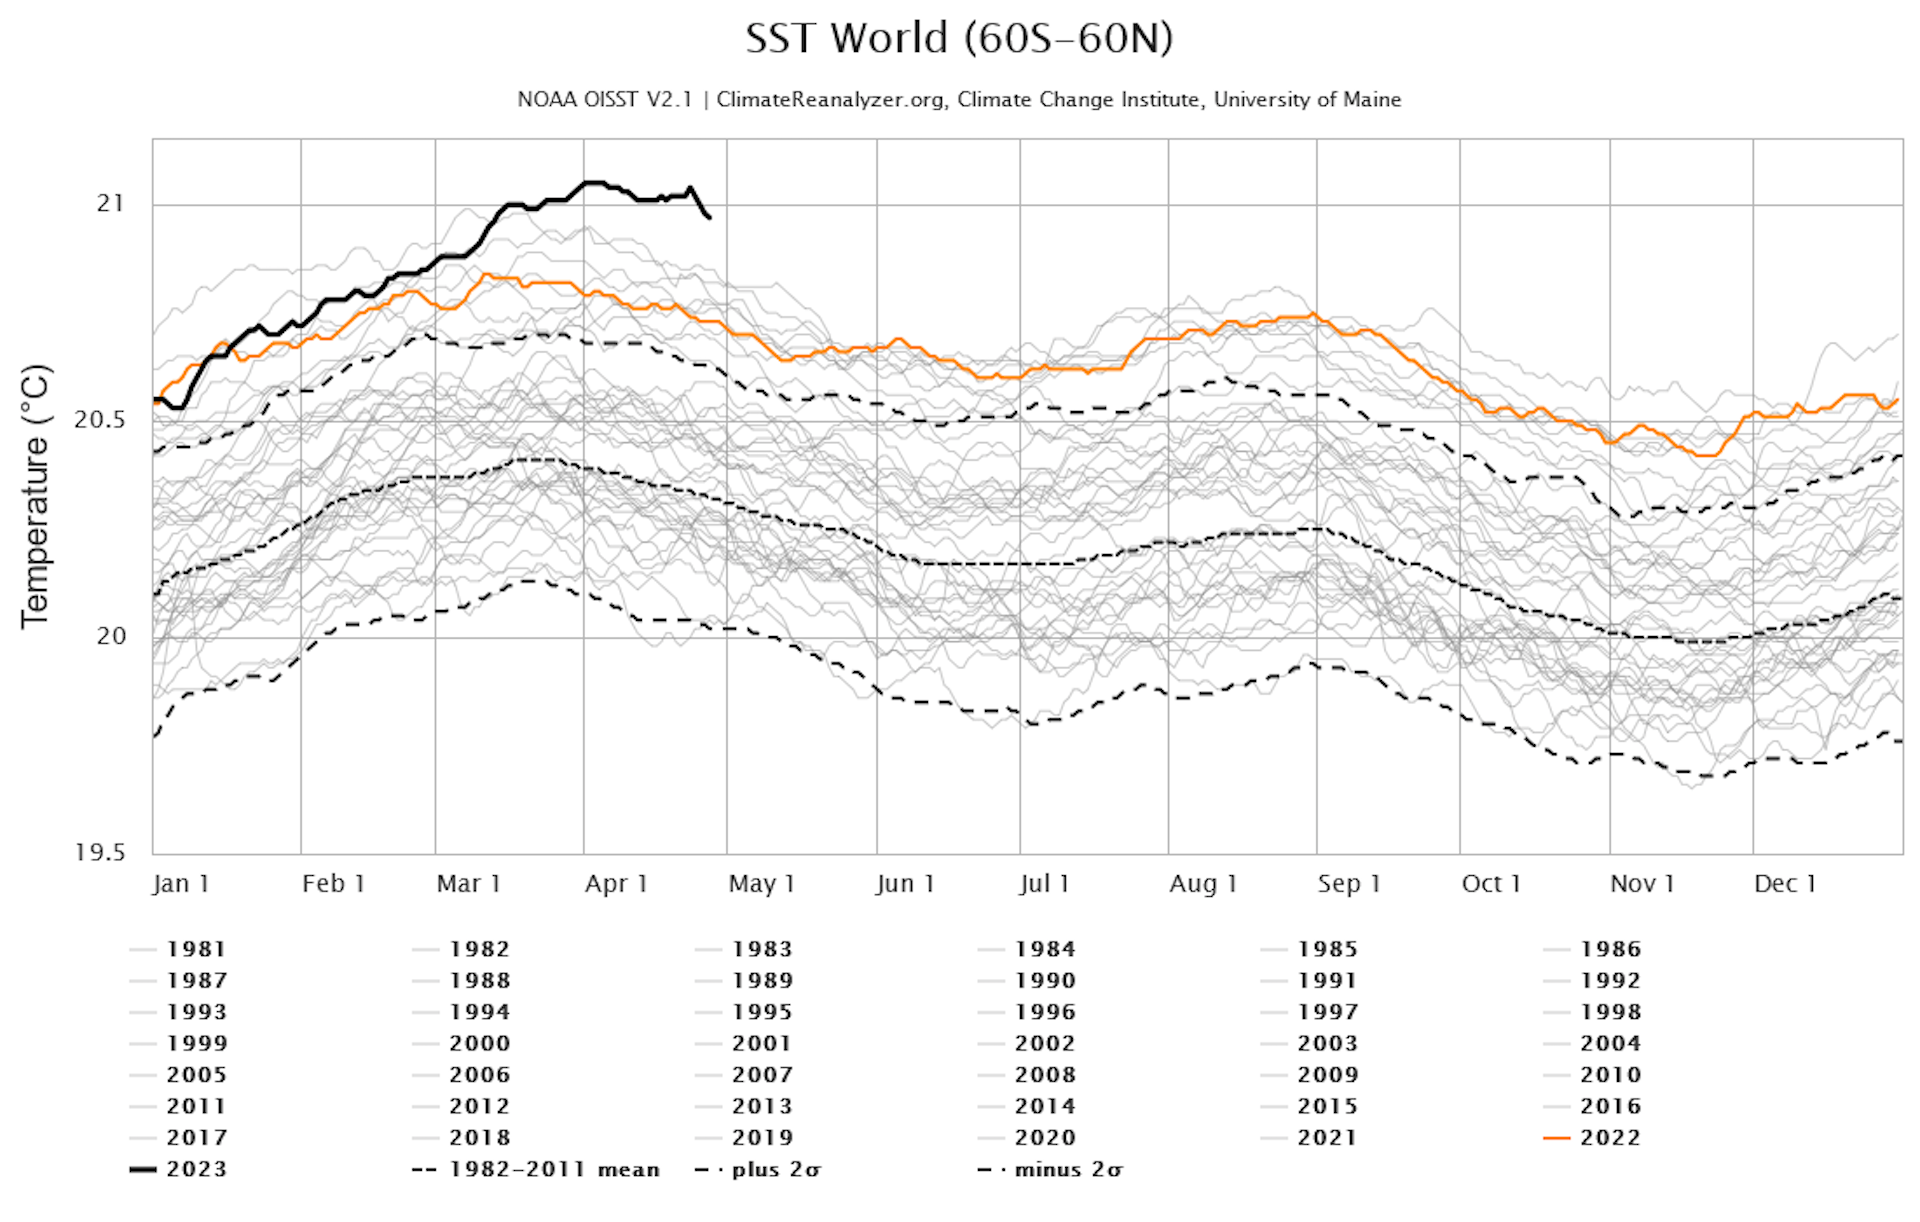 This graphs shows global ocean surface temperatures, with the 2023 track at the top.